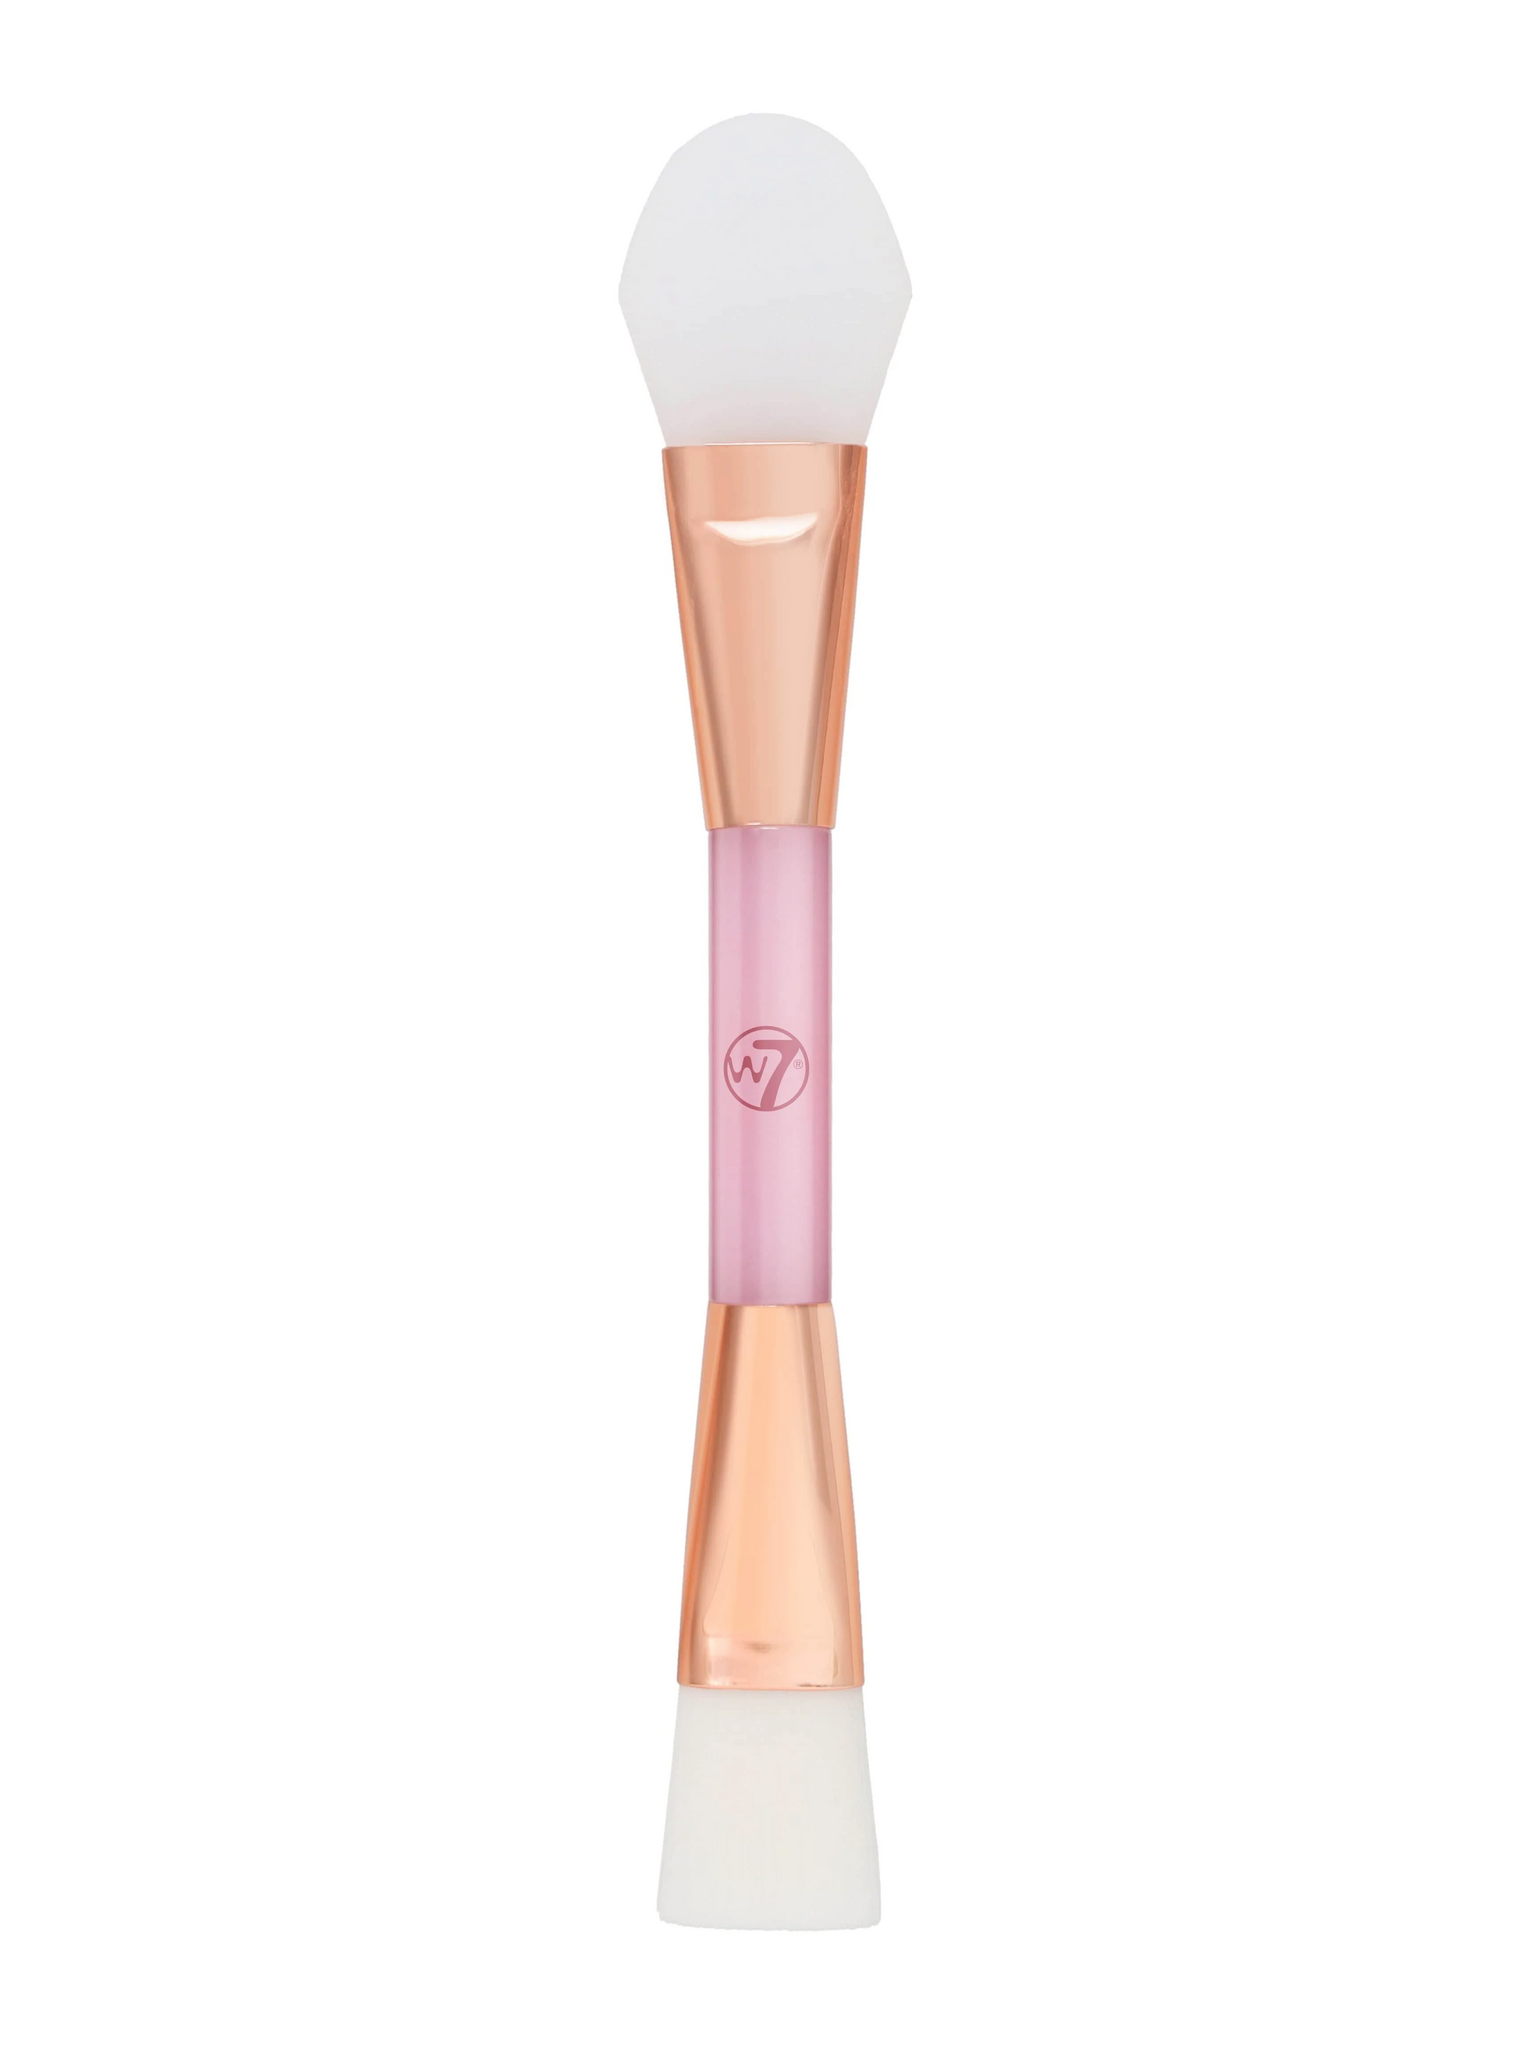 W7 GET GLOWING! Double ended face mask applicator